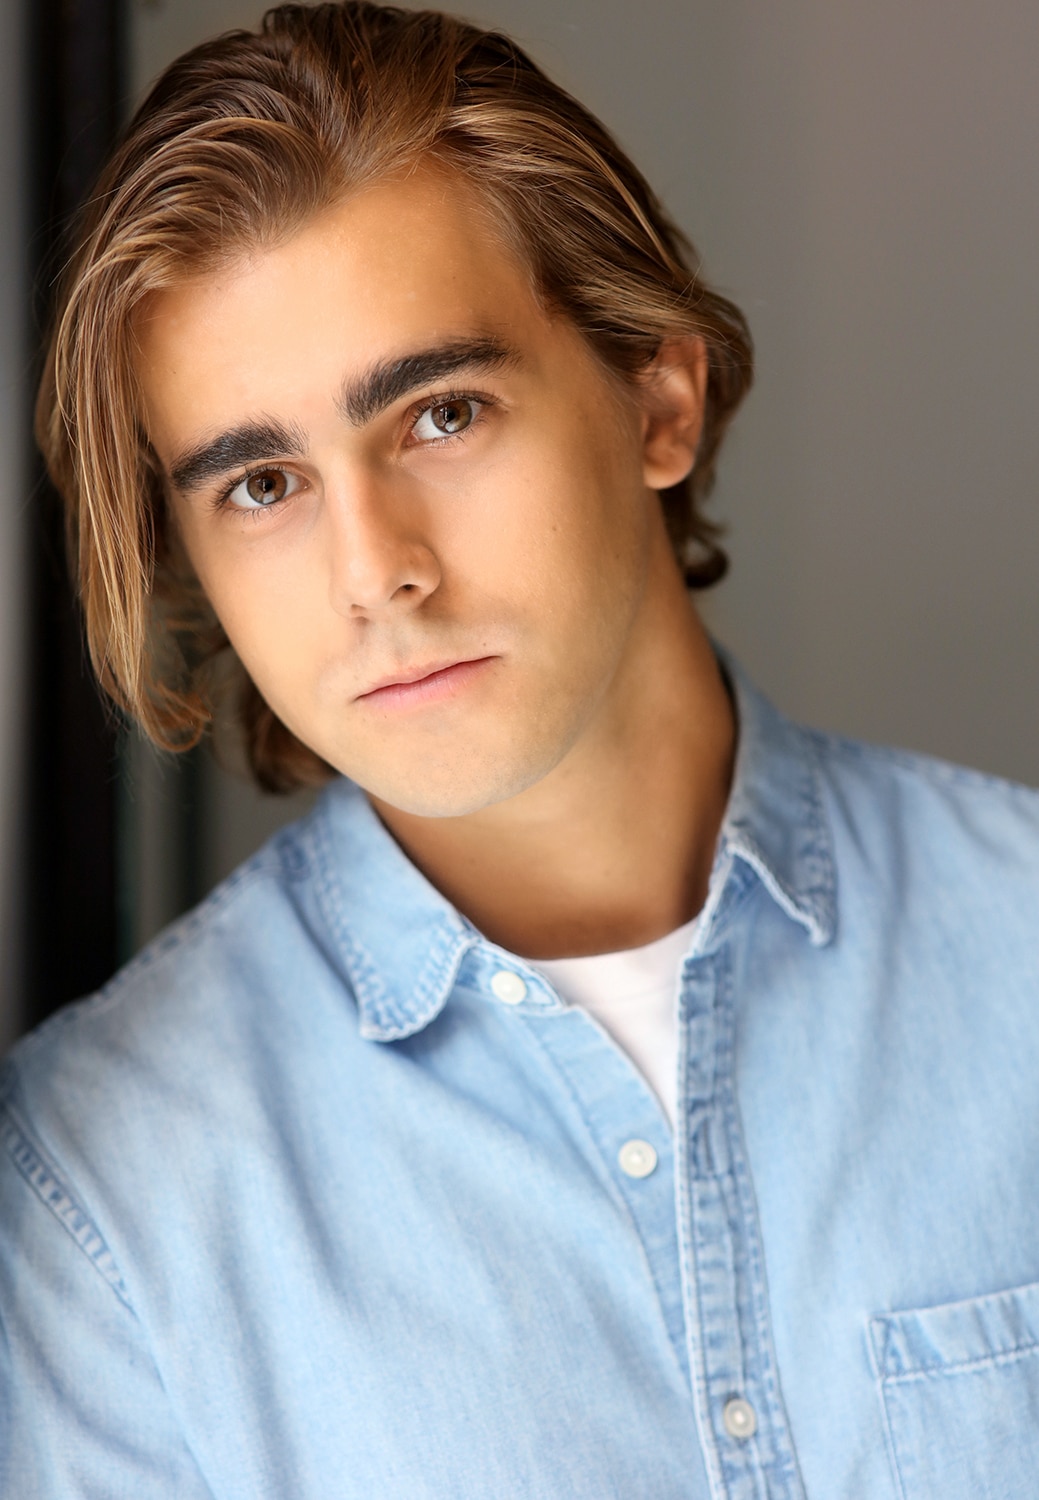 handsome male actor headshot nyc